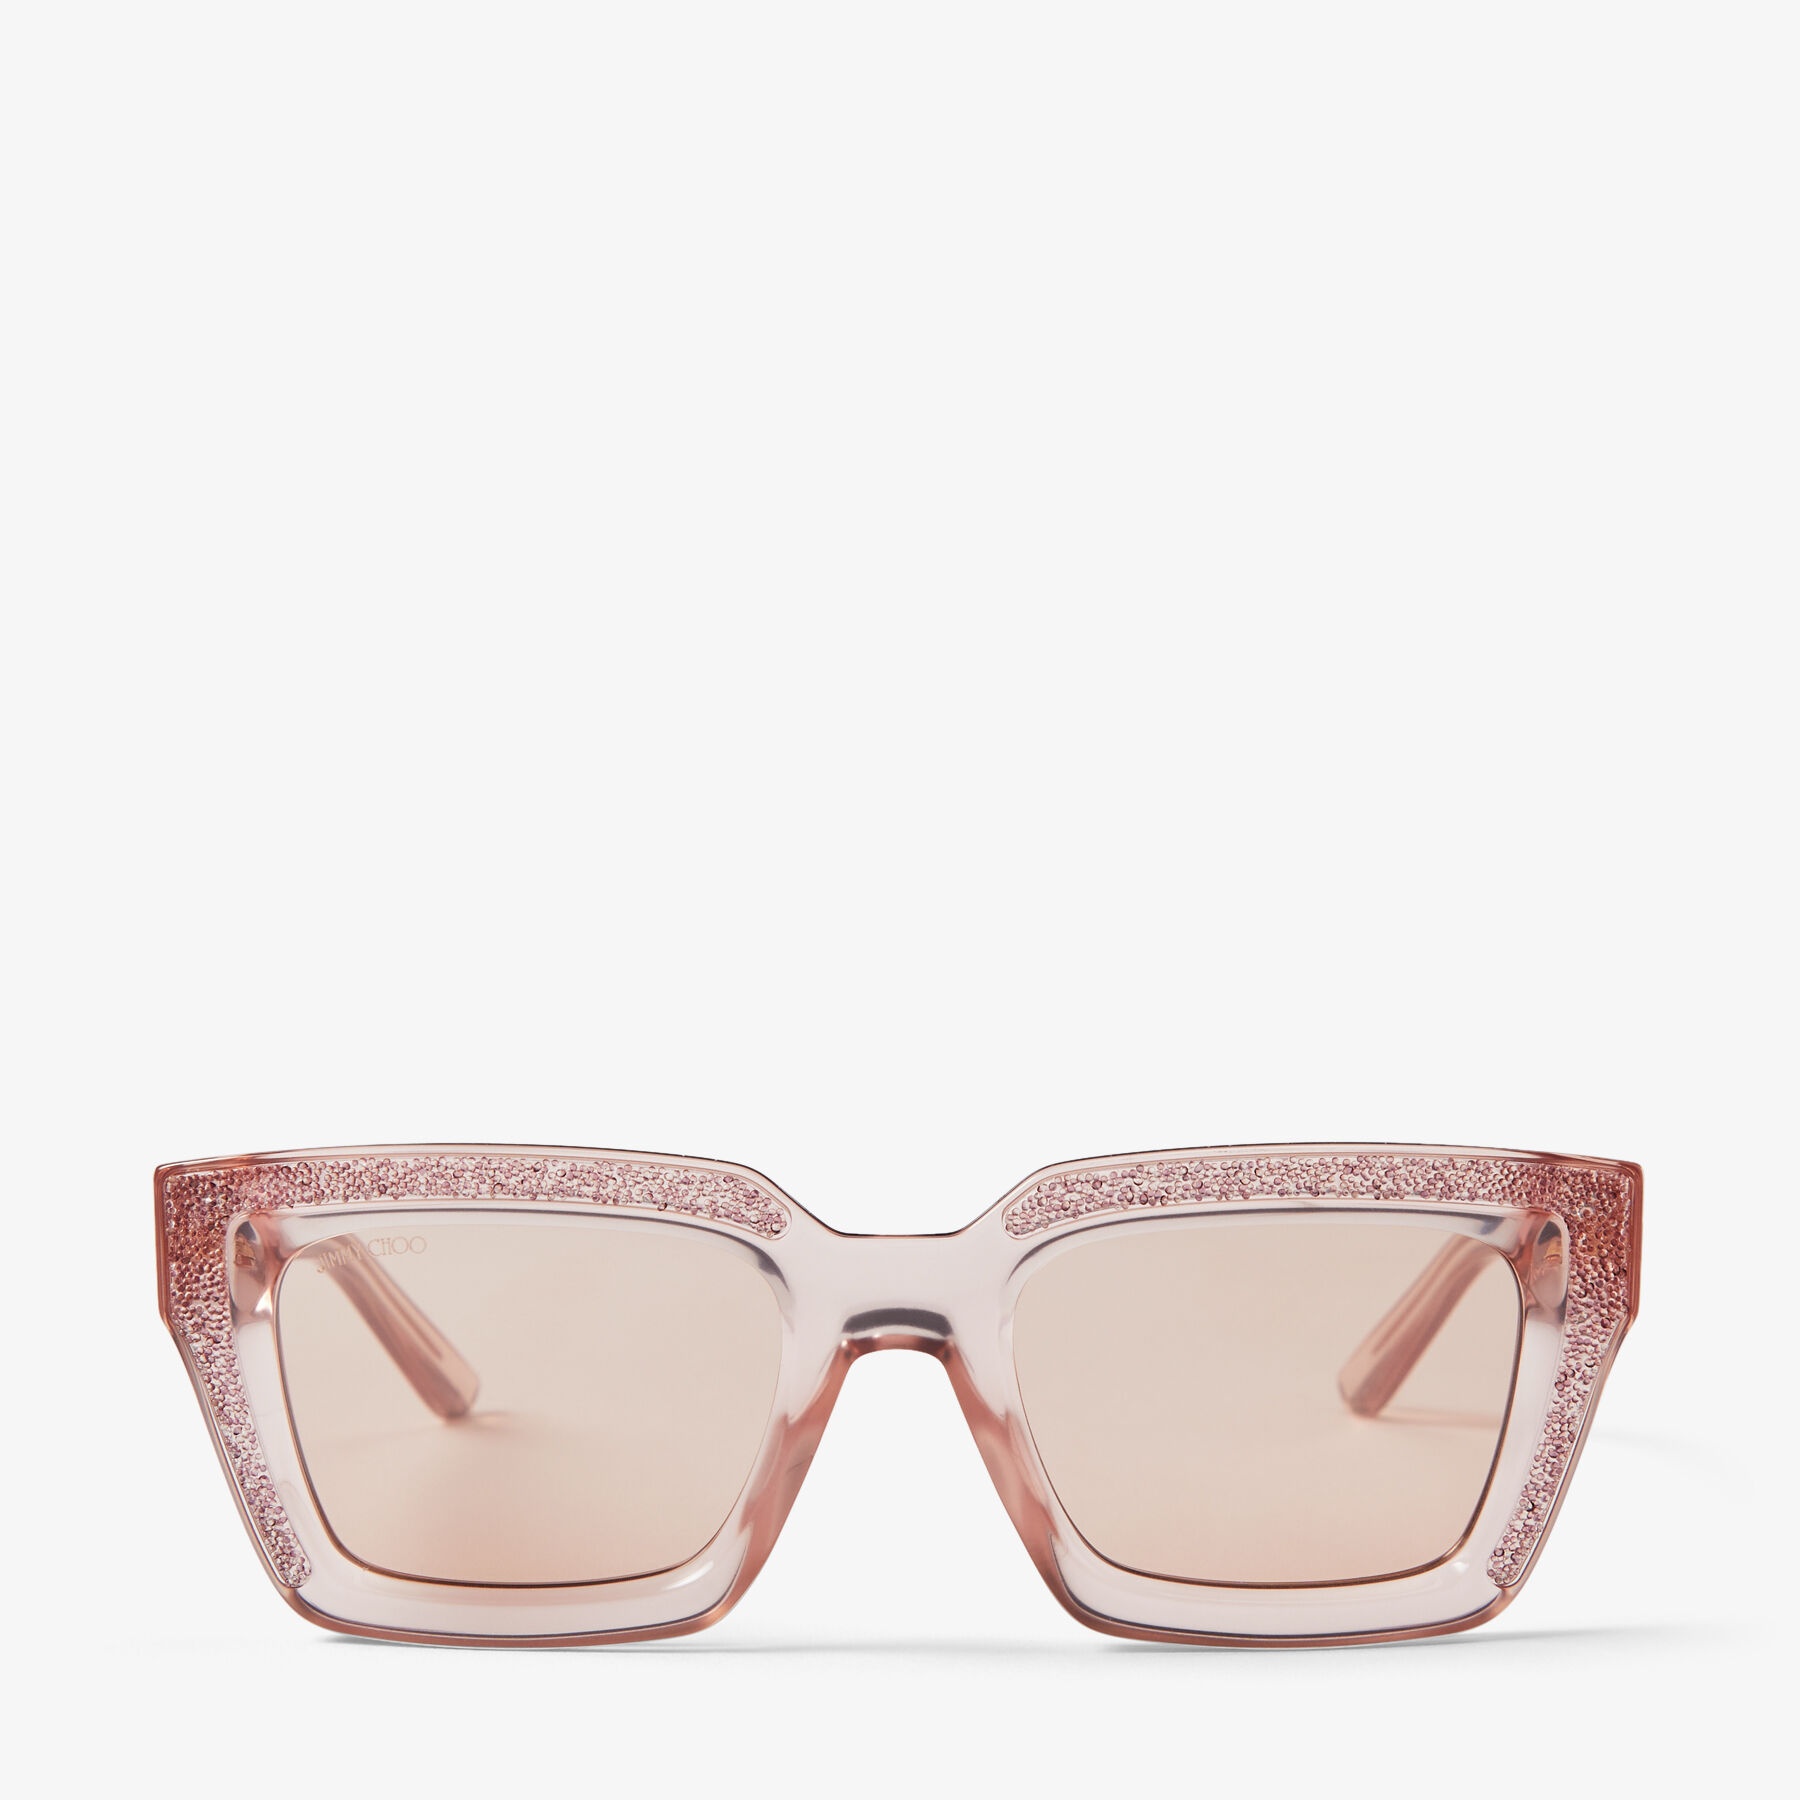 Megs
Nude Square Frame Sunglasses with Swarovski Crystals - 1